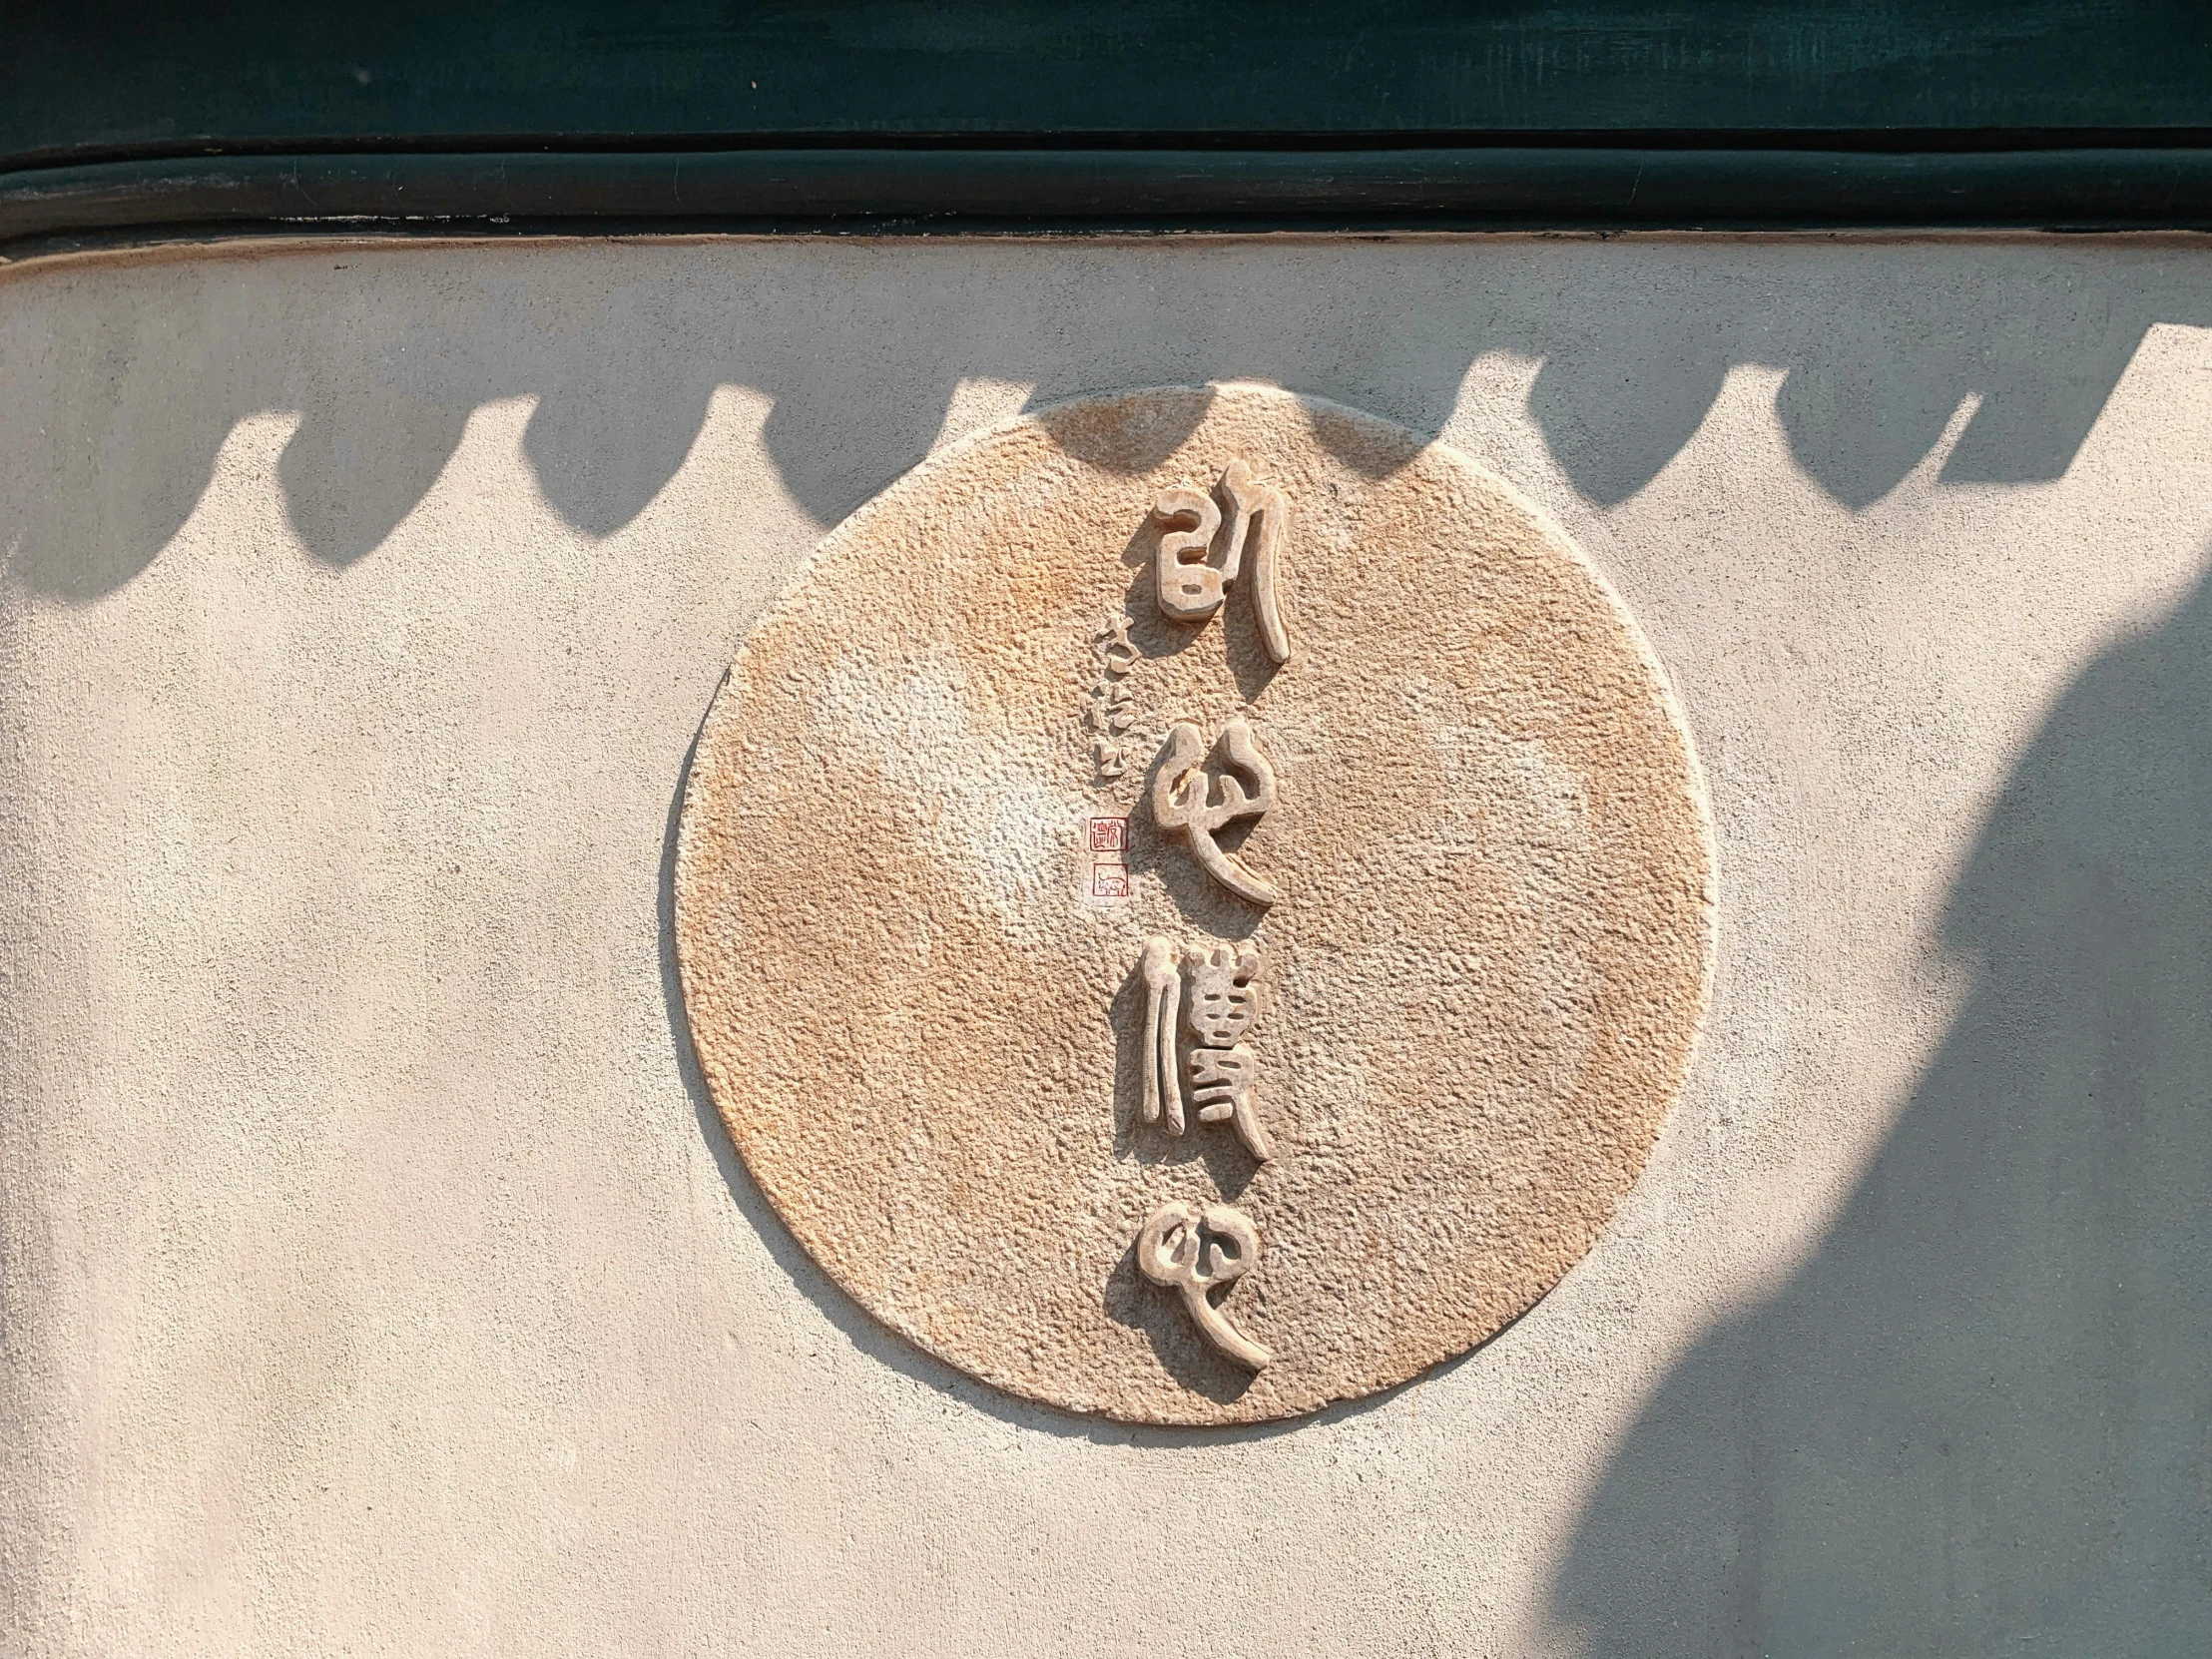 shadow cast by the sun and casting shadows on a stone plaque